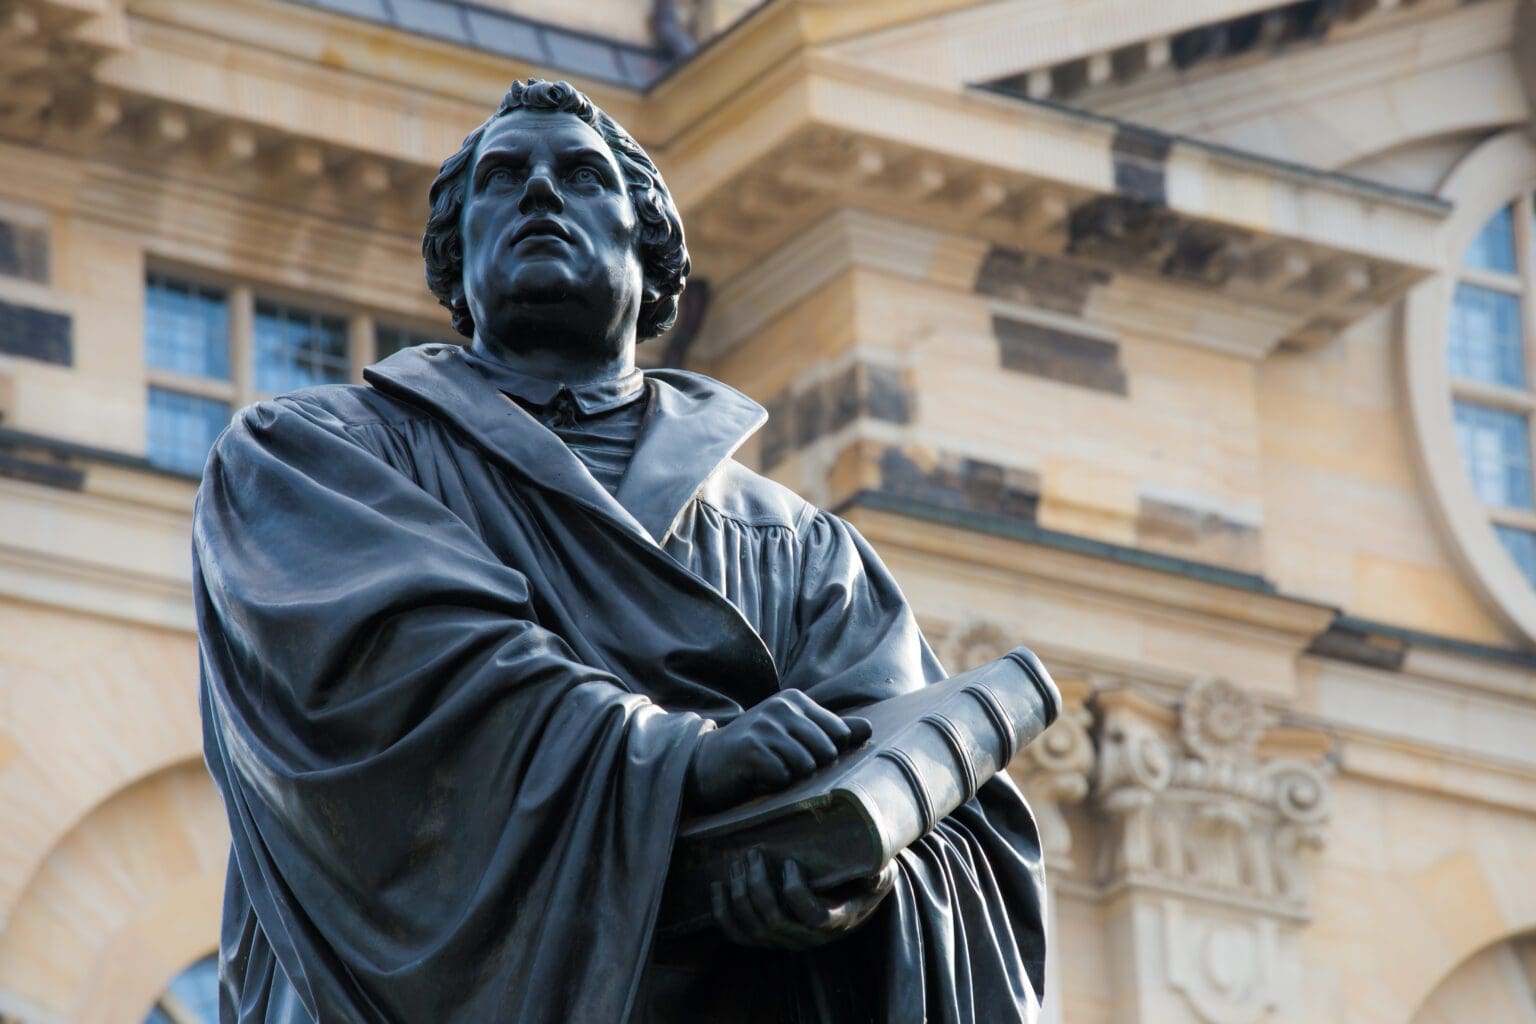 Marking the 505th Anniversary of the Reformation